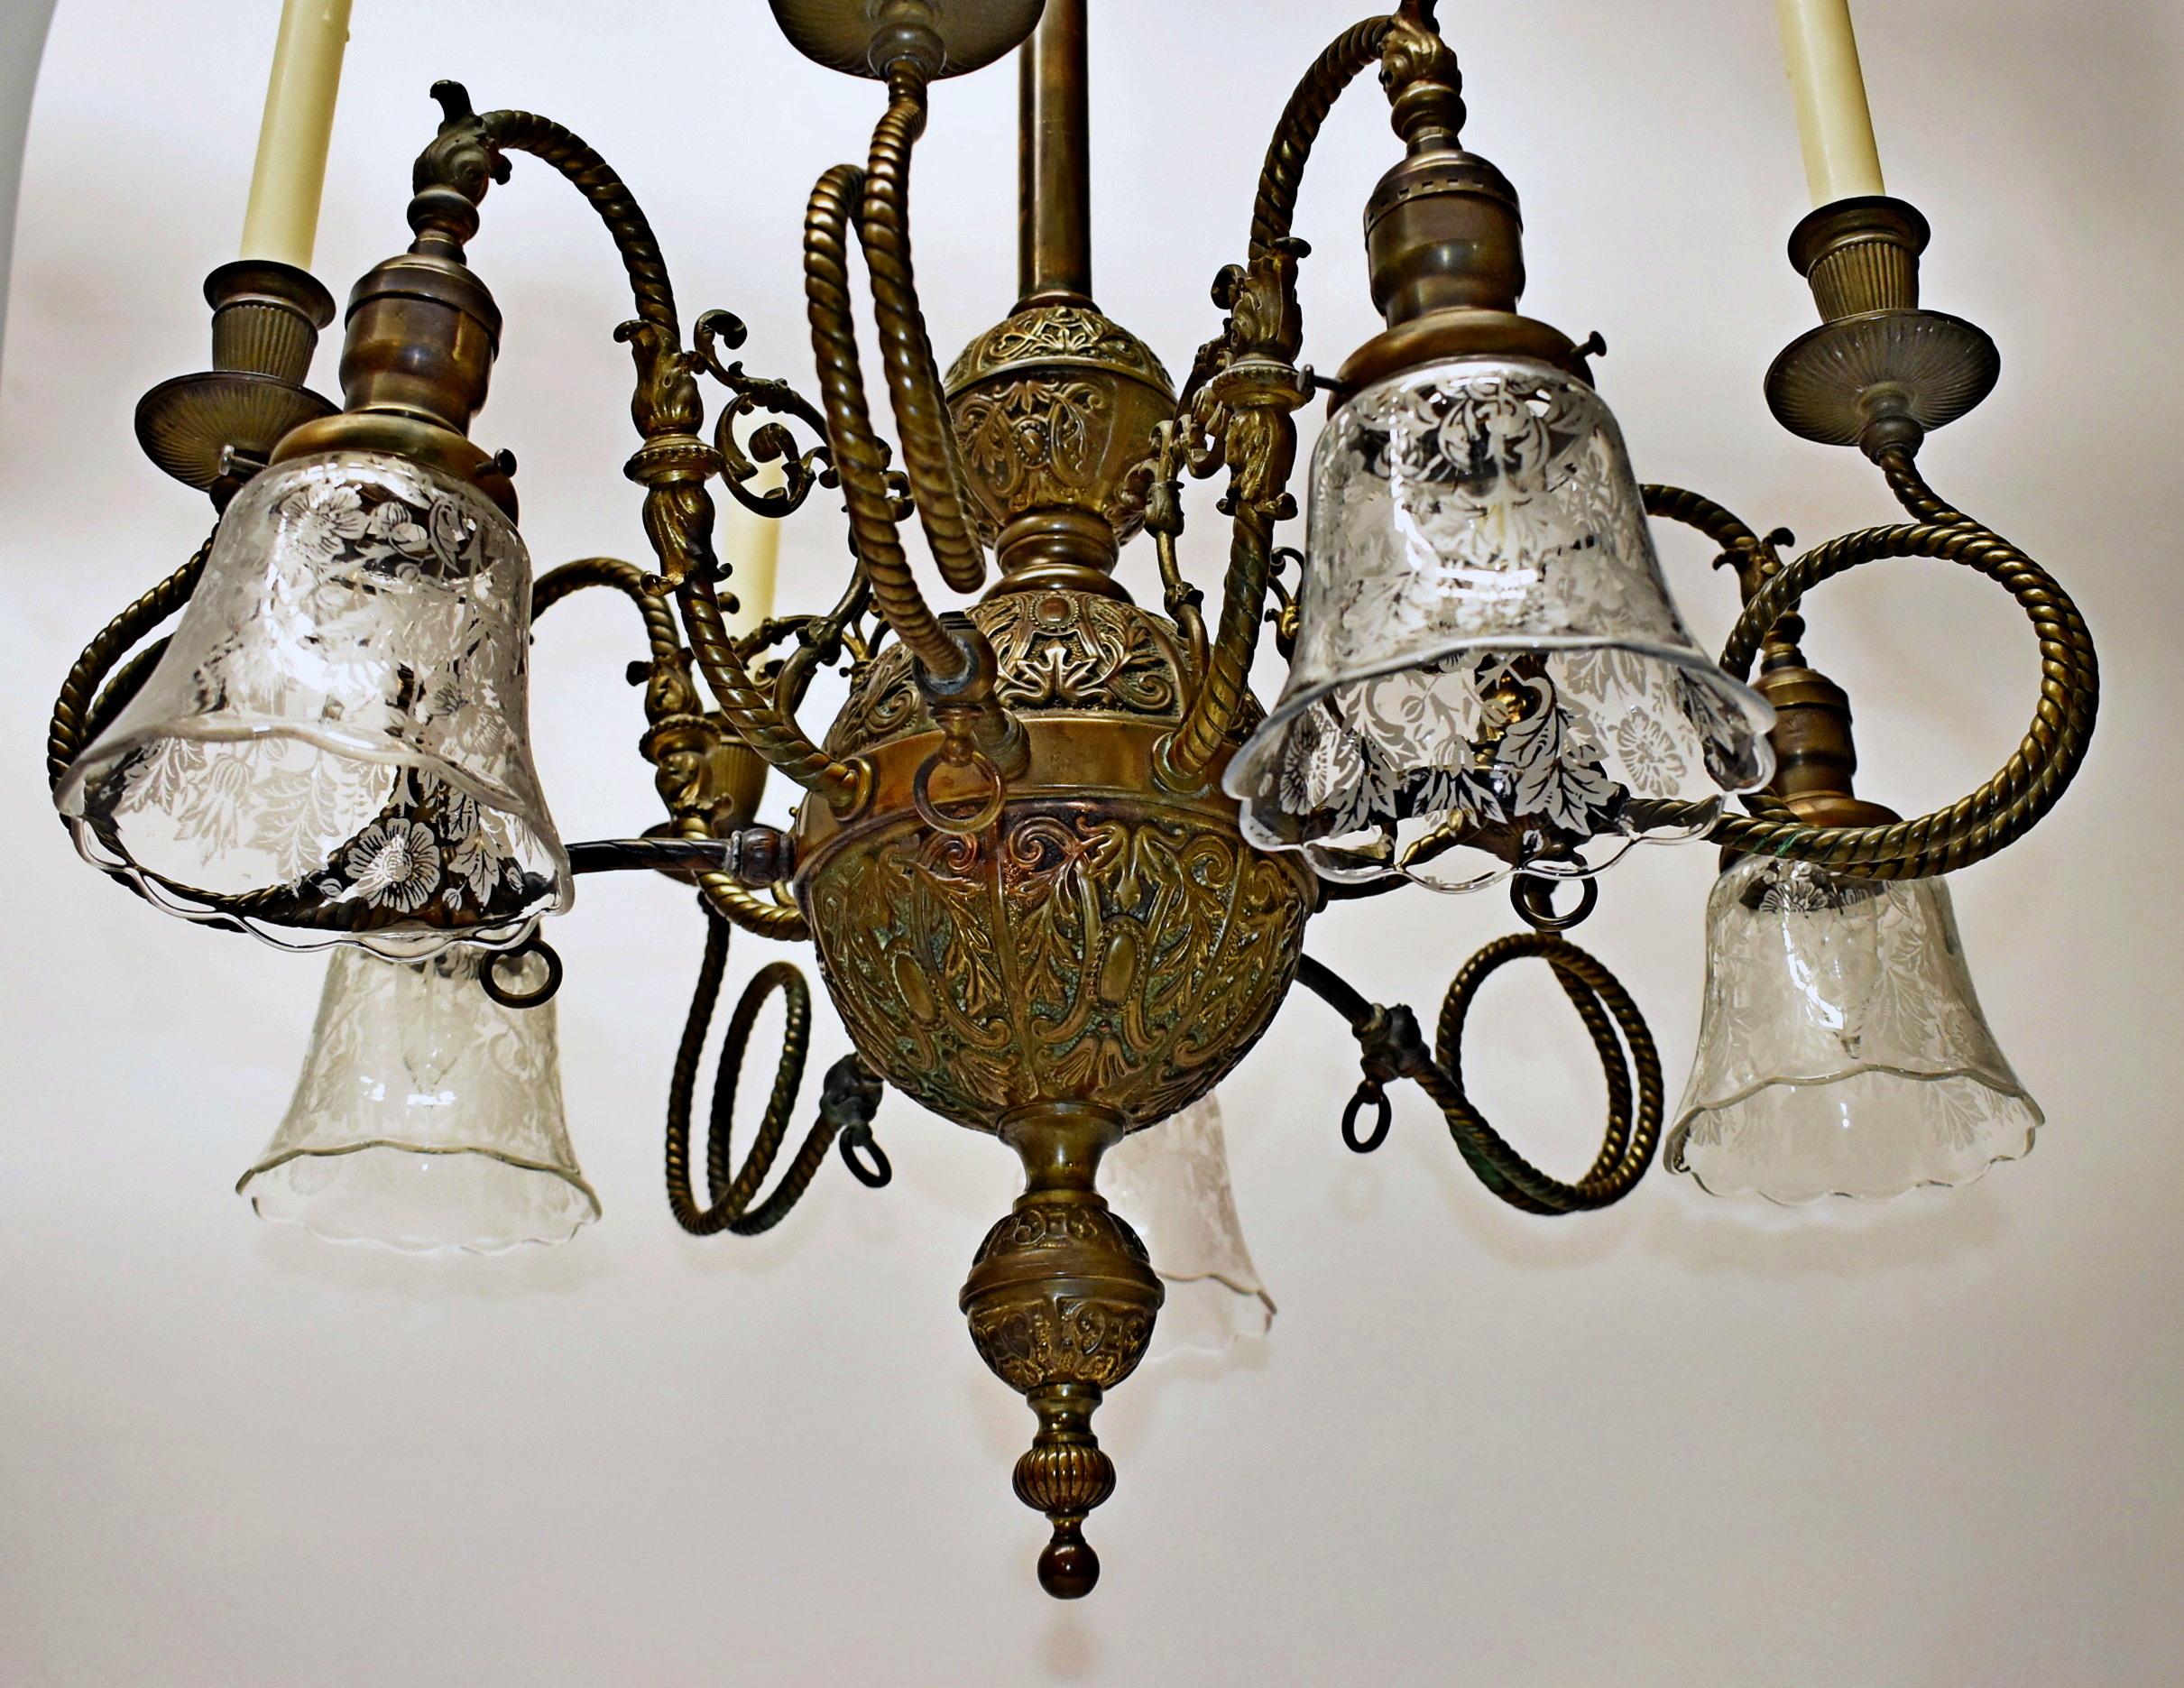 Victorian Gas & Electric Brass Chandelier. Circa 1890's. Rewired. Very ornate with heavily embossed beautiful patina. 5 electrified arms with etched glass shades included. 5 gas light arms could be electrified or made into gas. Great Vintage